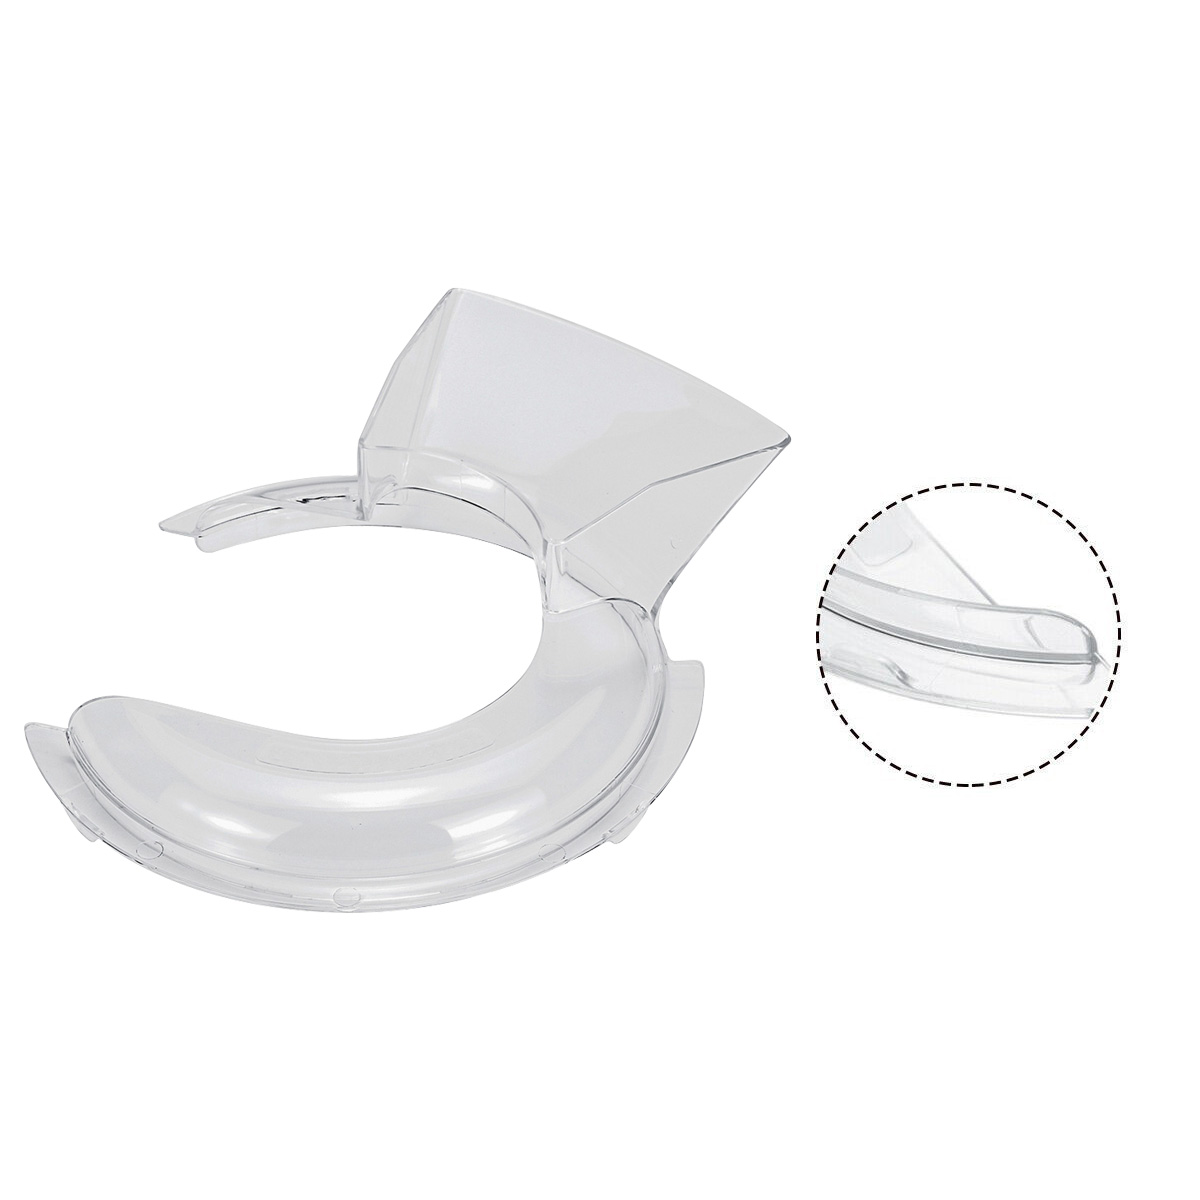 Dido Replacement Pouring Shield Splash Guard For Kitchenaid 4.5/5Qt Stand Mixers Ksm500Ps Ksm450 - image 4 of 8